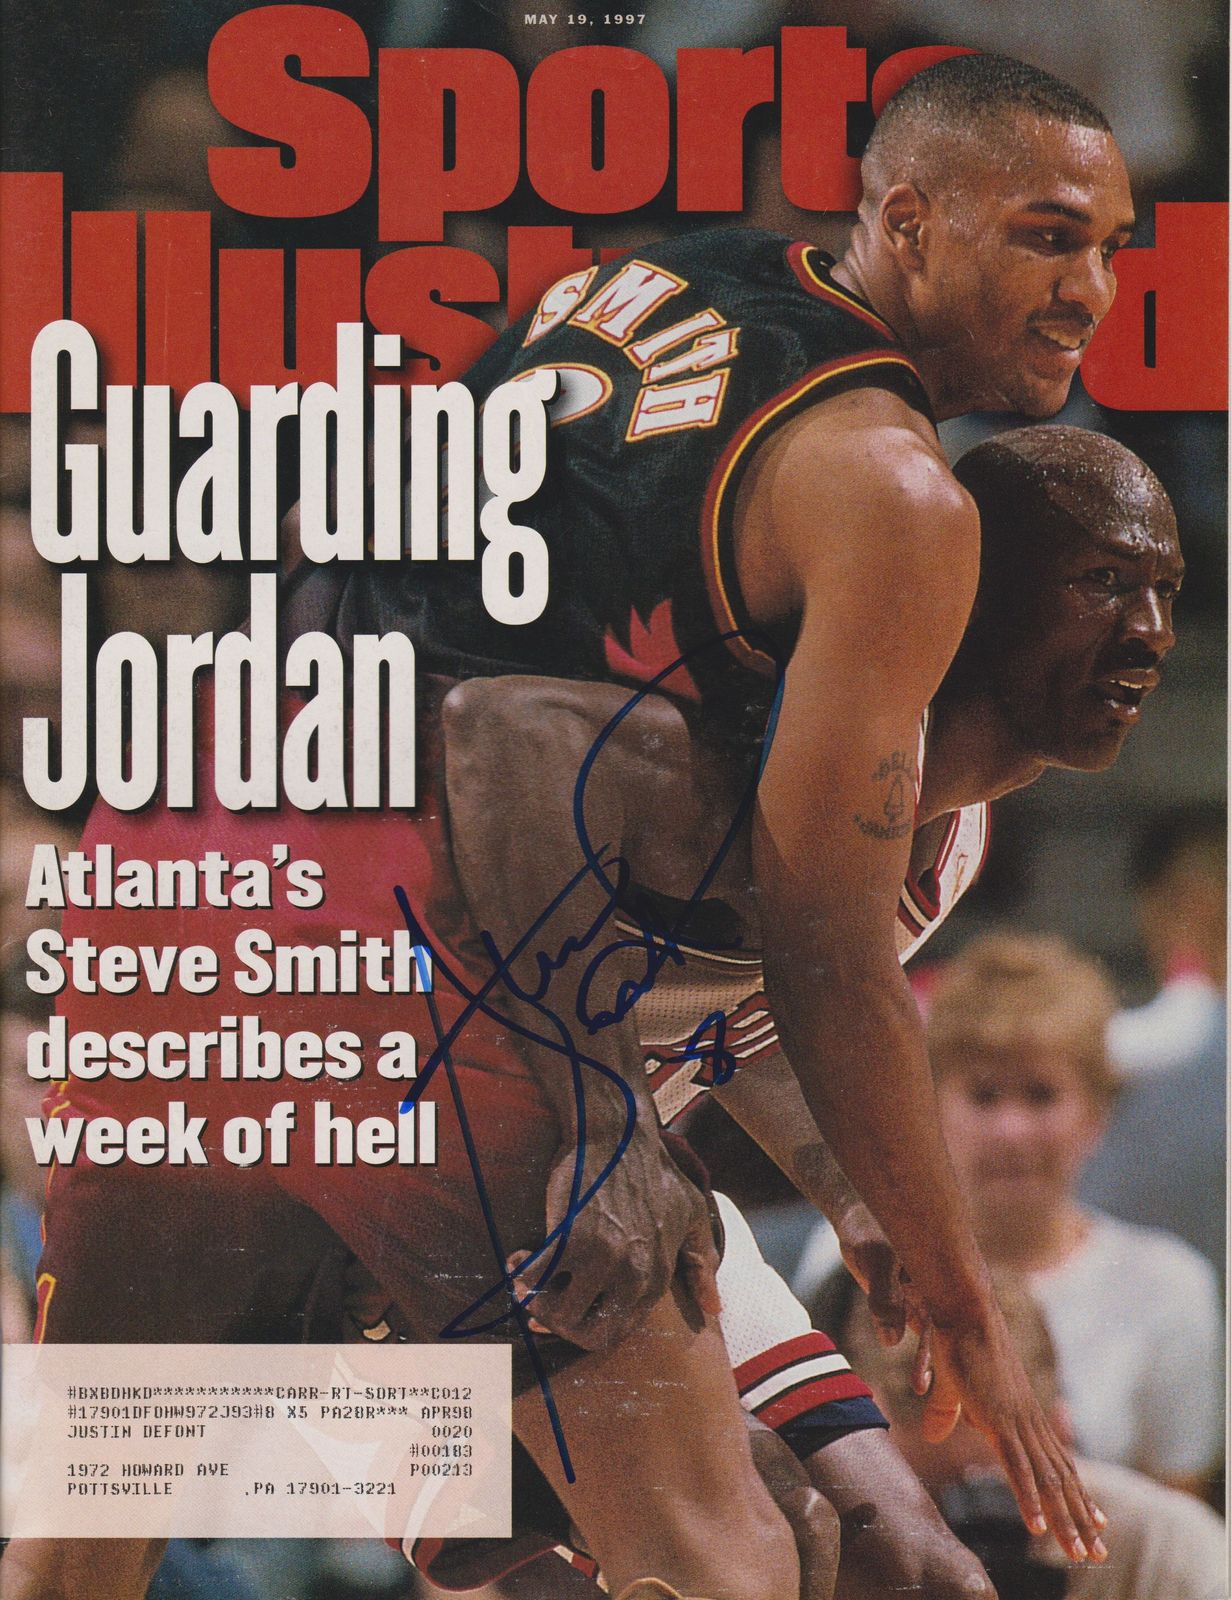 Primary image for Steve Smith Signed Autographed Complete 1997 "Sports Illustrated" Magazine